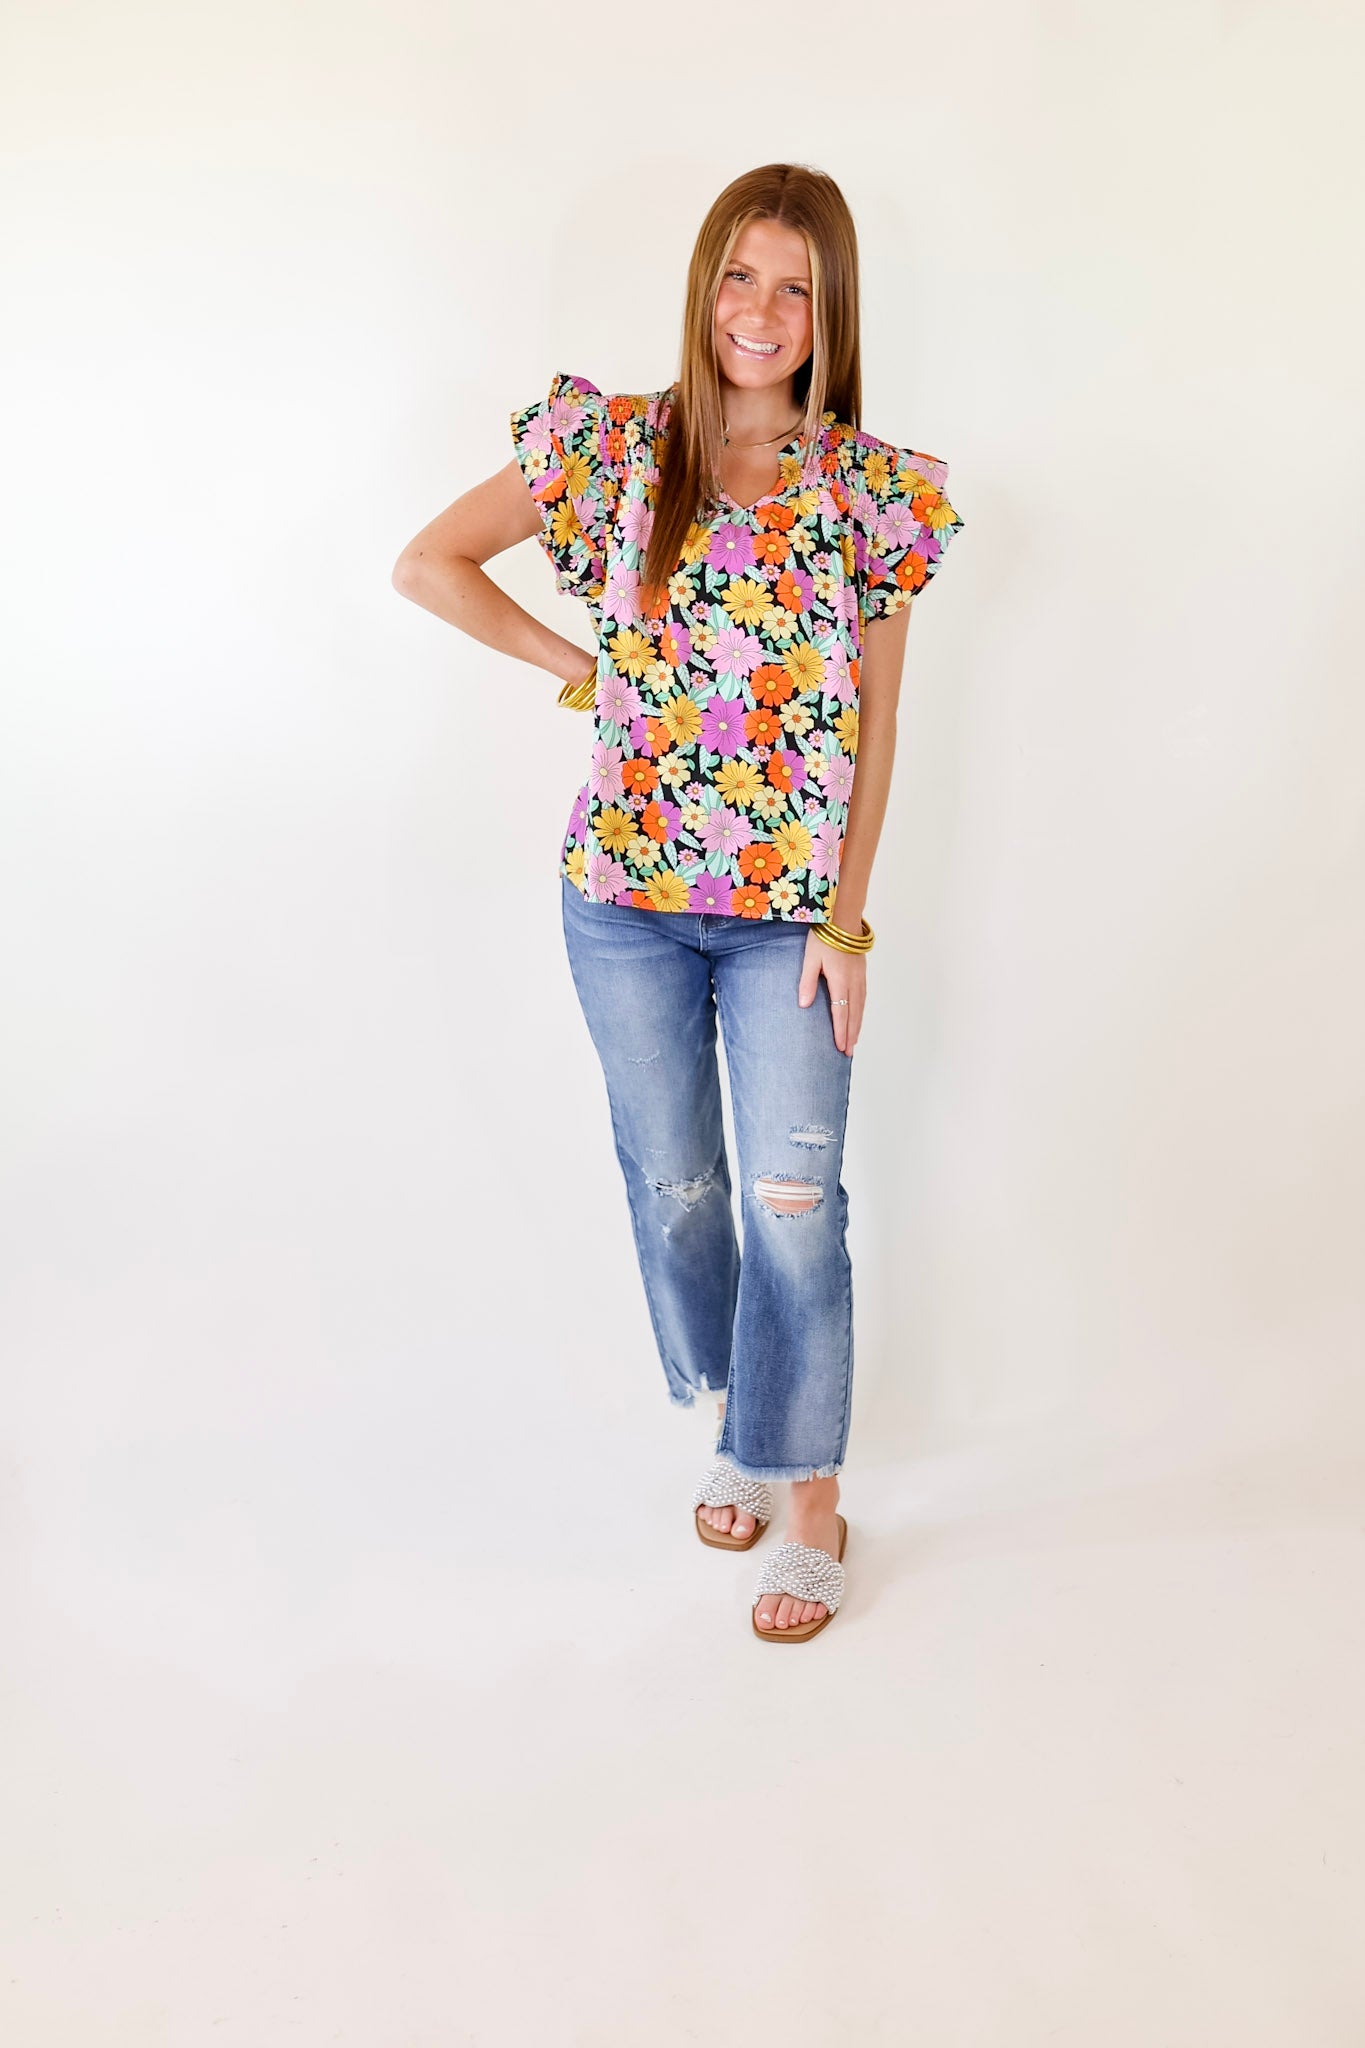 Pretty Days Floral Notched Neckline Top in Black - Giddy Up Glamour Boutique